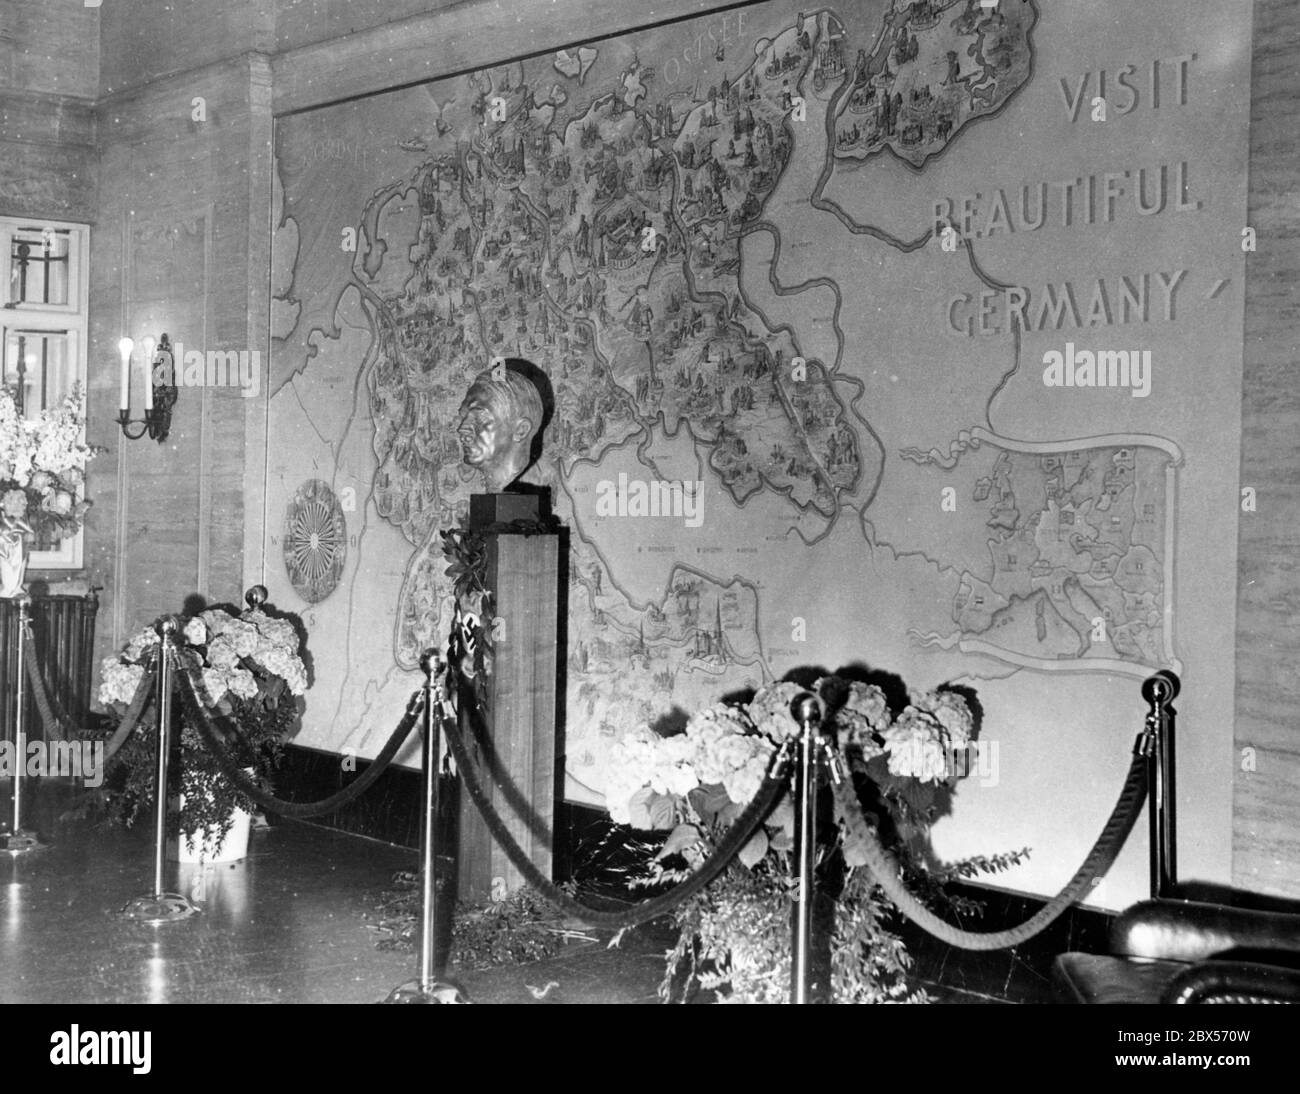 A travel agency of the German Reich is opened in New York with a festive ceremony. Here in the room of the Deutsche Reichsbahn is a large wall map of the Reich (between a compass rose on the left and a small map of Europe on the right) and a bust of Adolf Hitler. On the map there is the invitation  'Visit Beautiful Germany'. Stock Photo